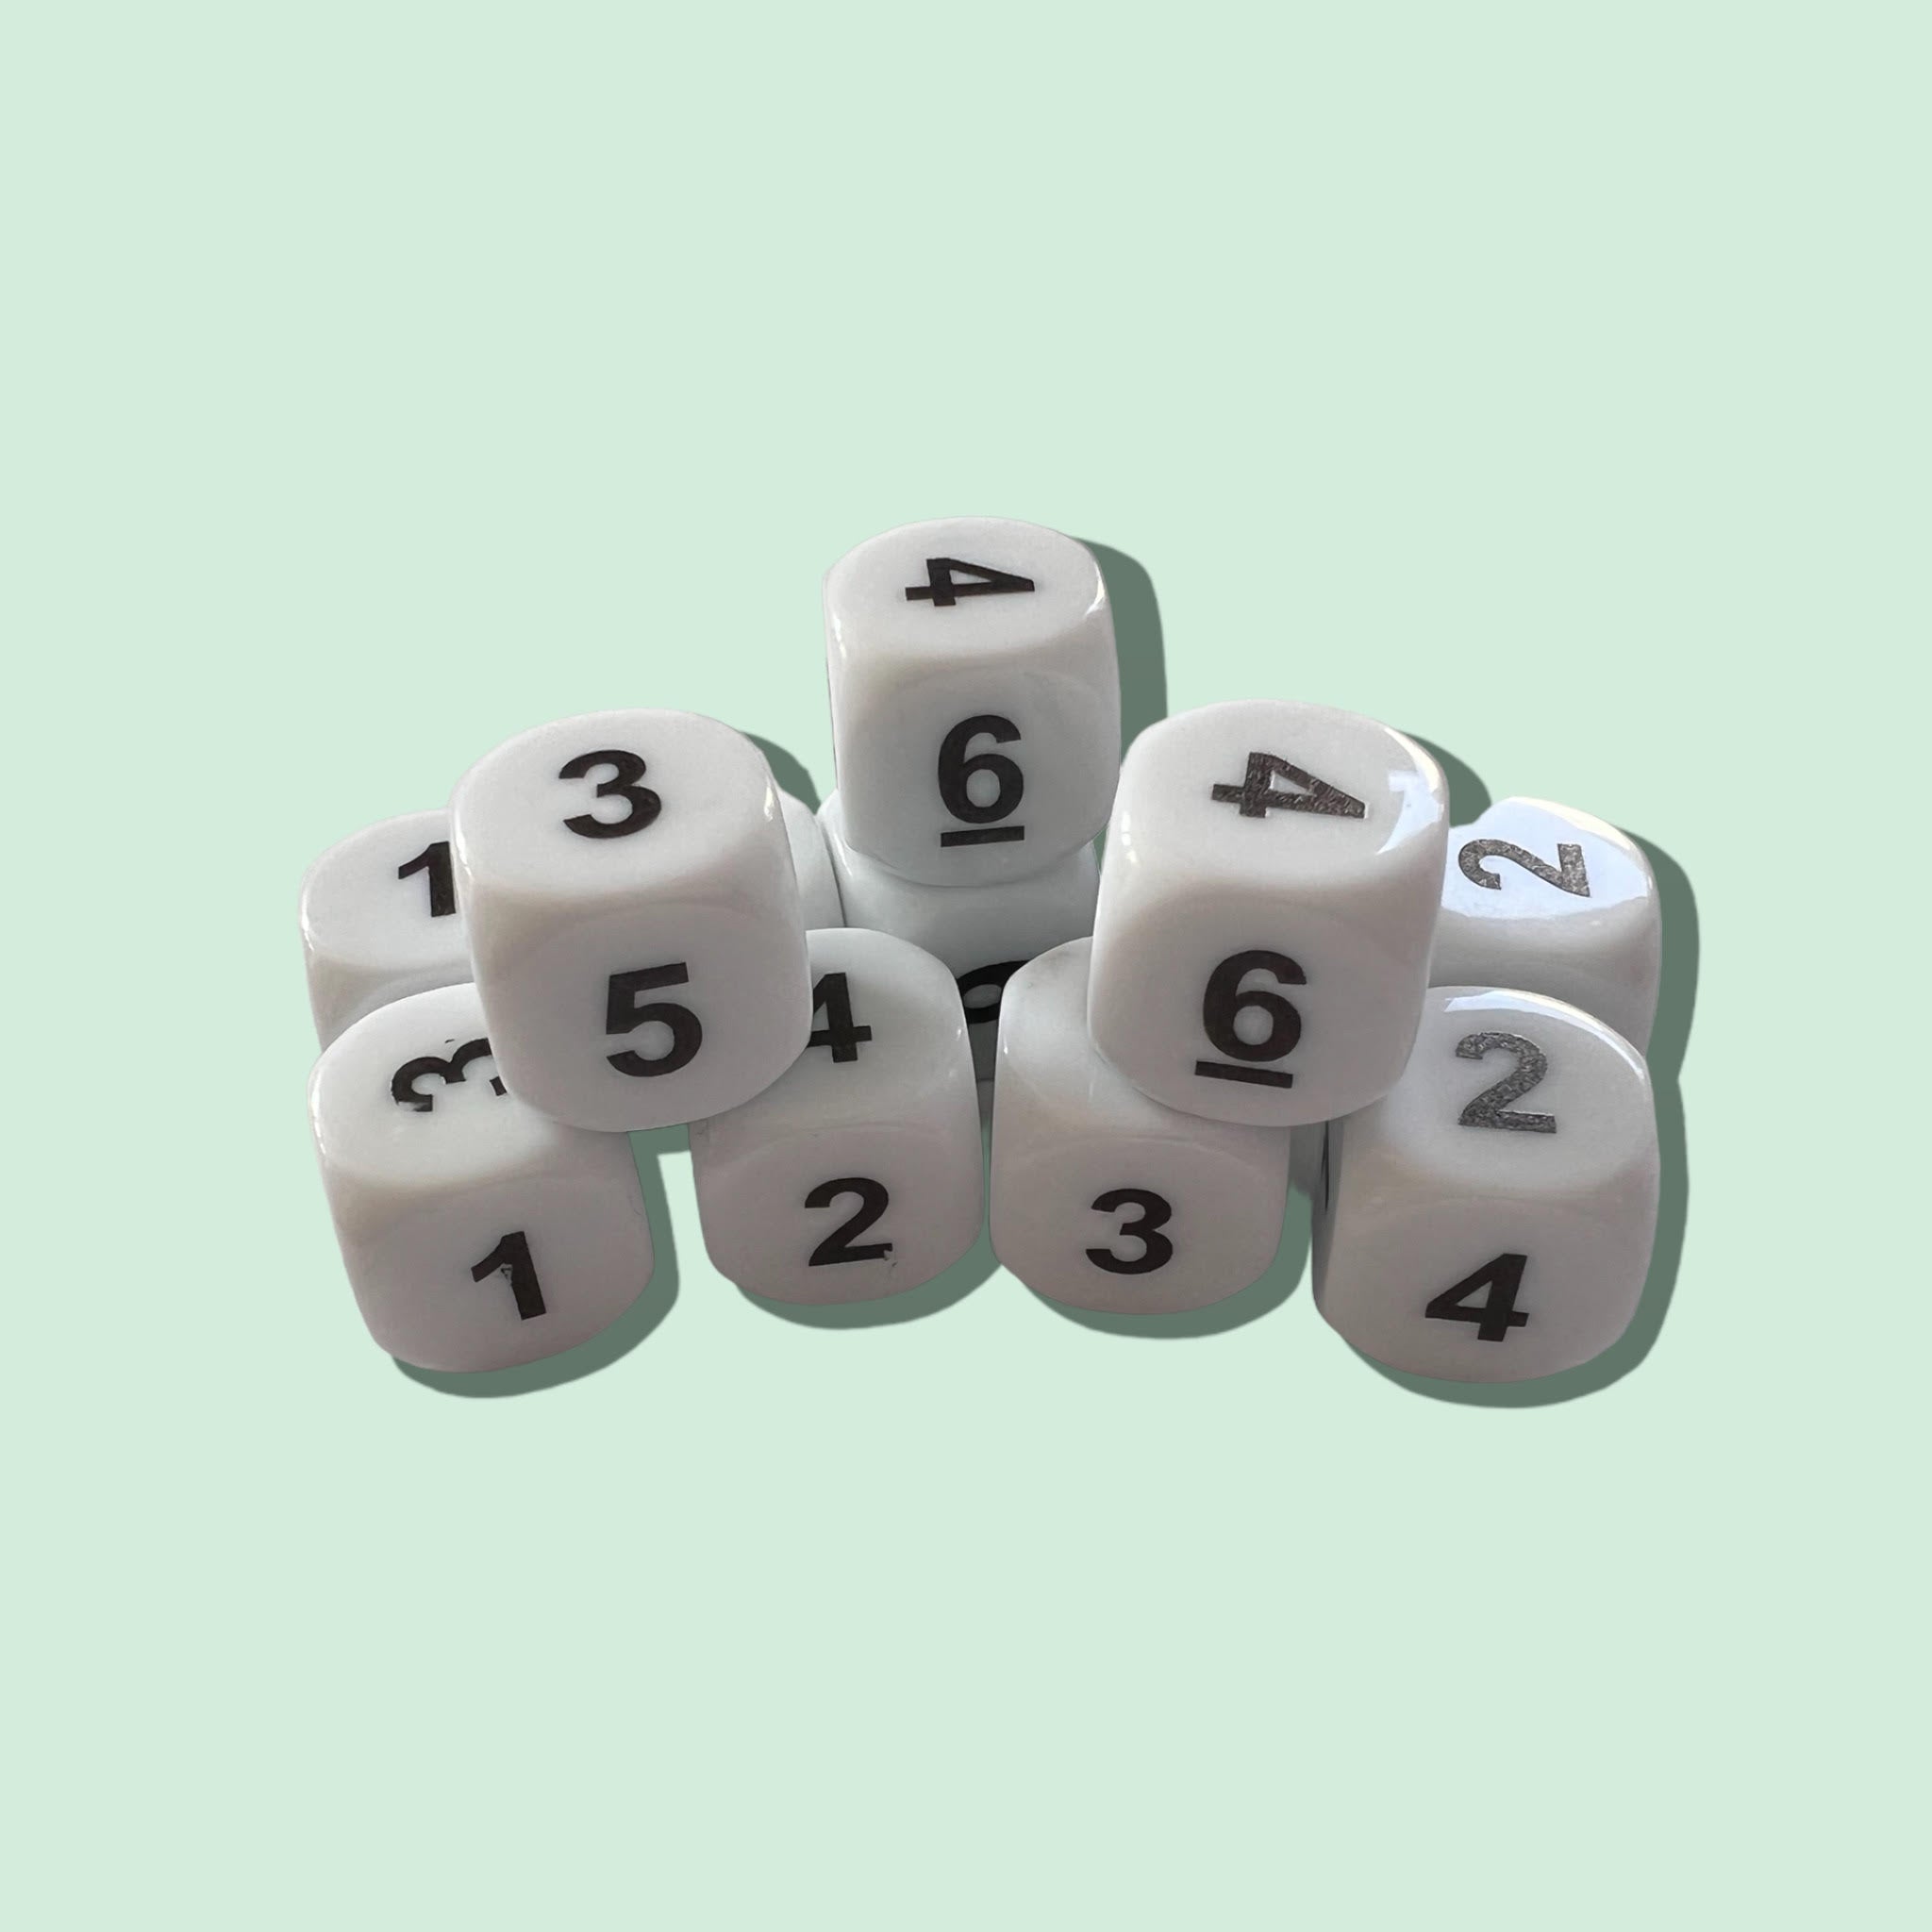 Dice - Digit Dice for use with Operations Dice